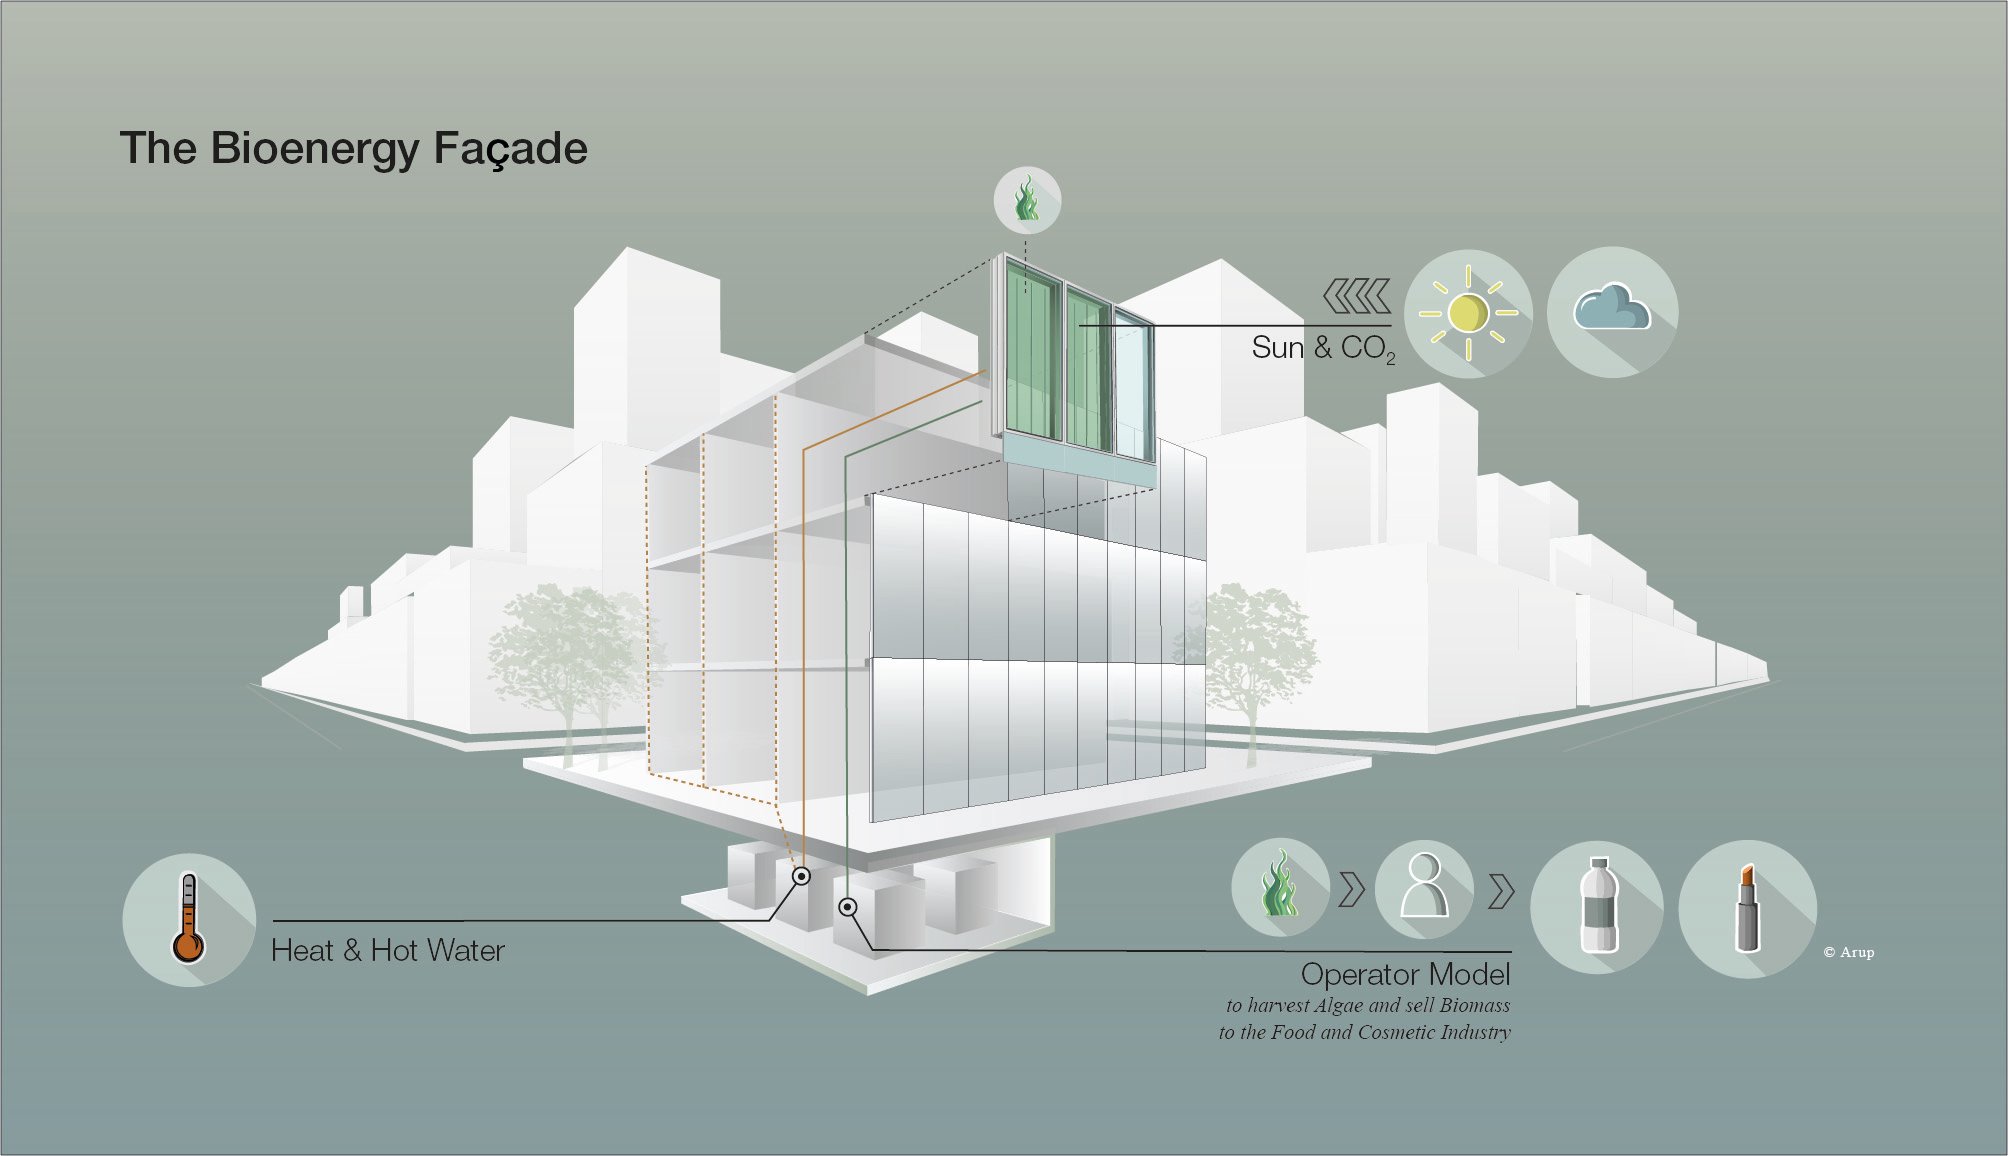 The graphic illustrates the function of the photobioreactors of the bioenergy facade.